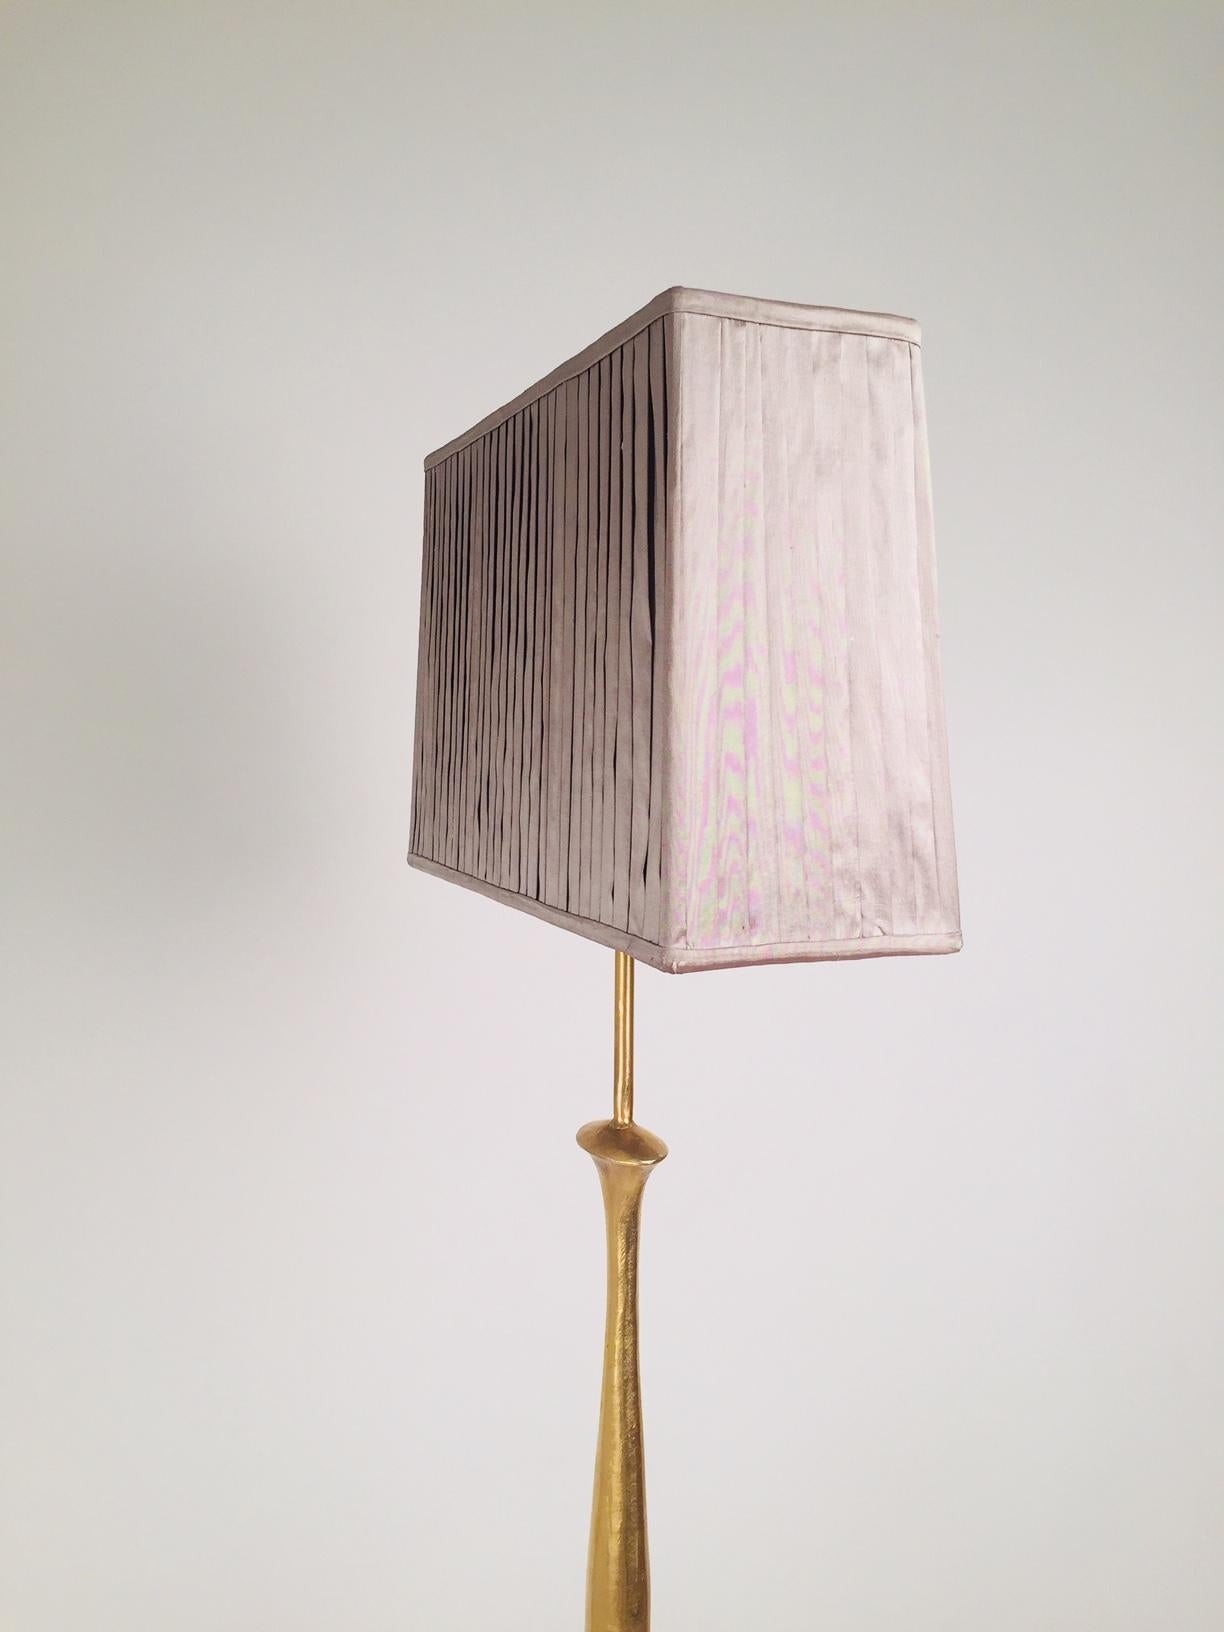 A 1960s brass floor lamp in the manner of Alberto Giacometti with grey folded shape.